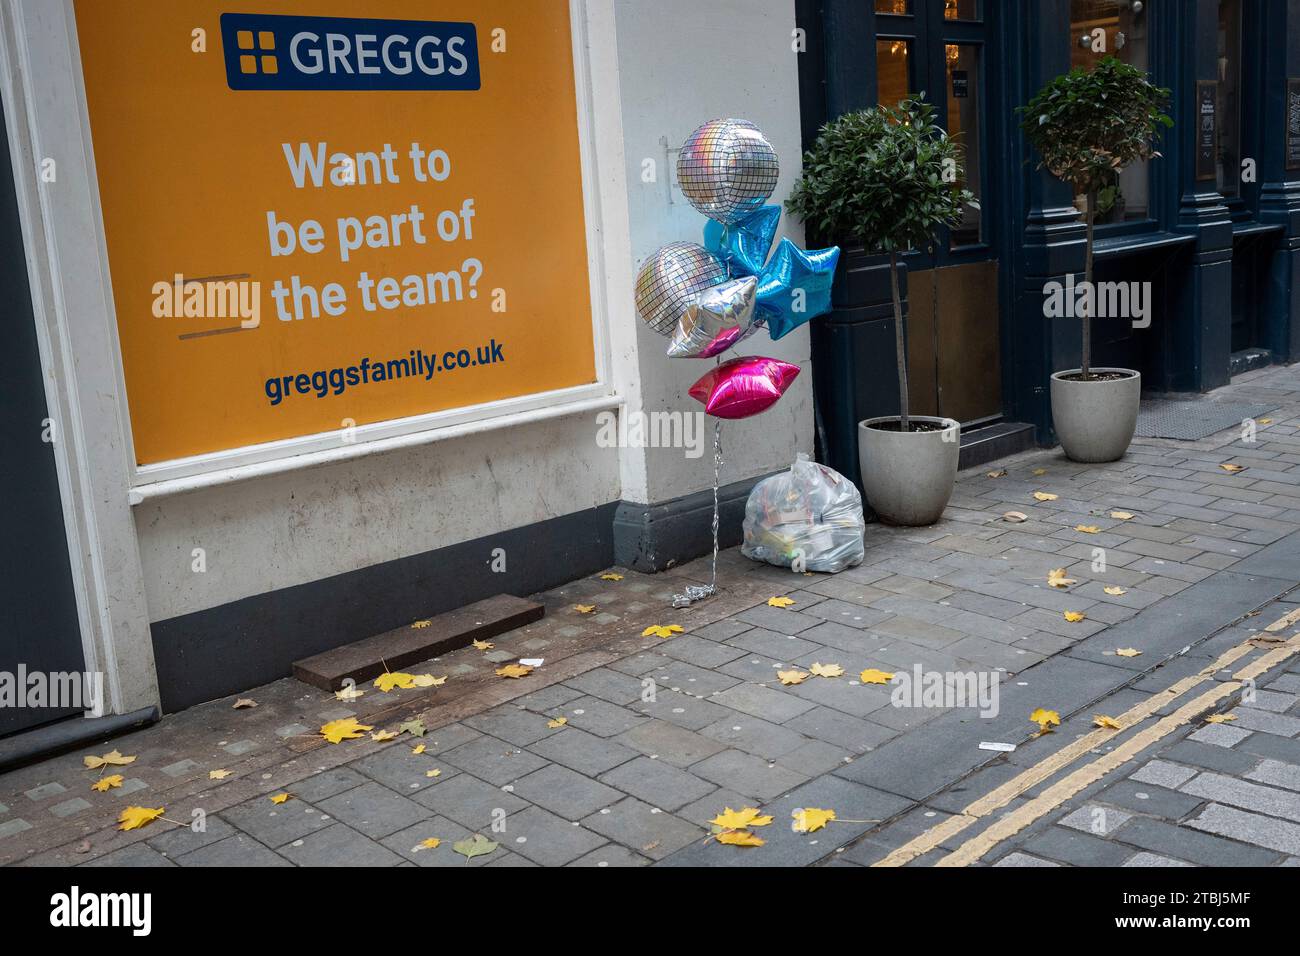 A street billboard advertises for jobs and careers with the Greggs bakery and retail company, on 7th December 2023, in the City of London, England. Stock Photo